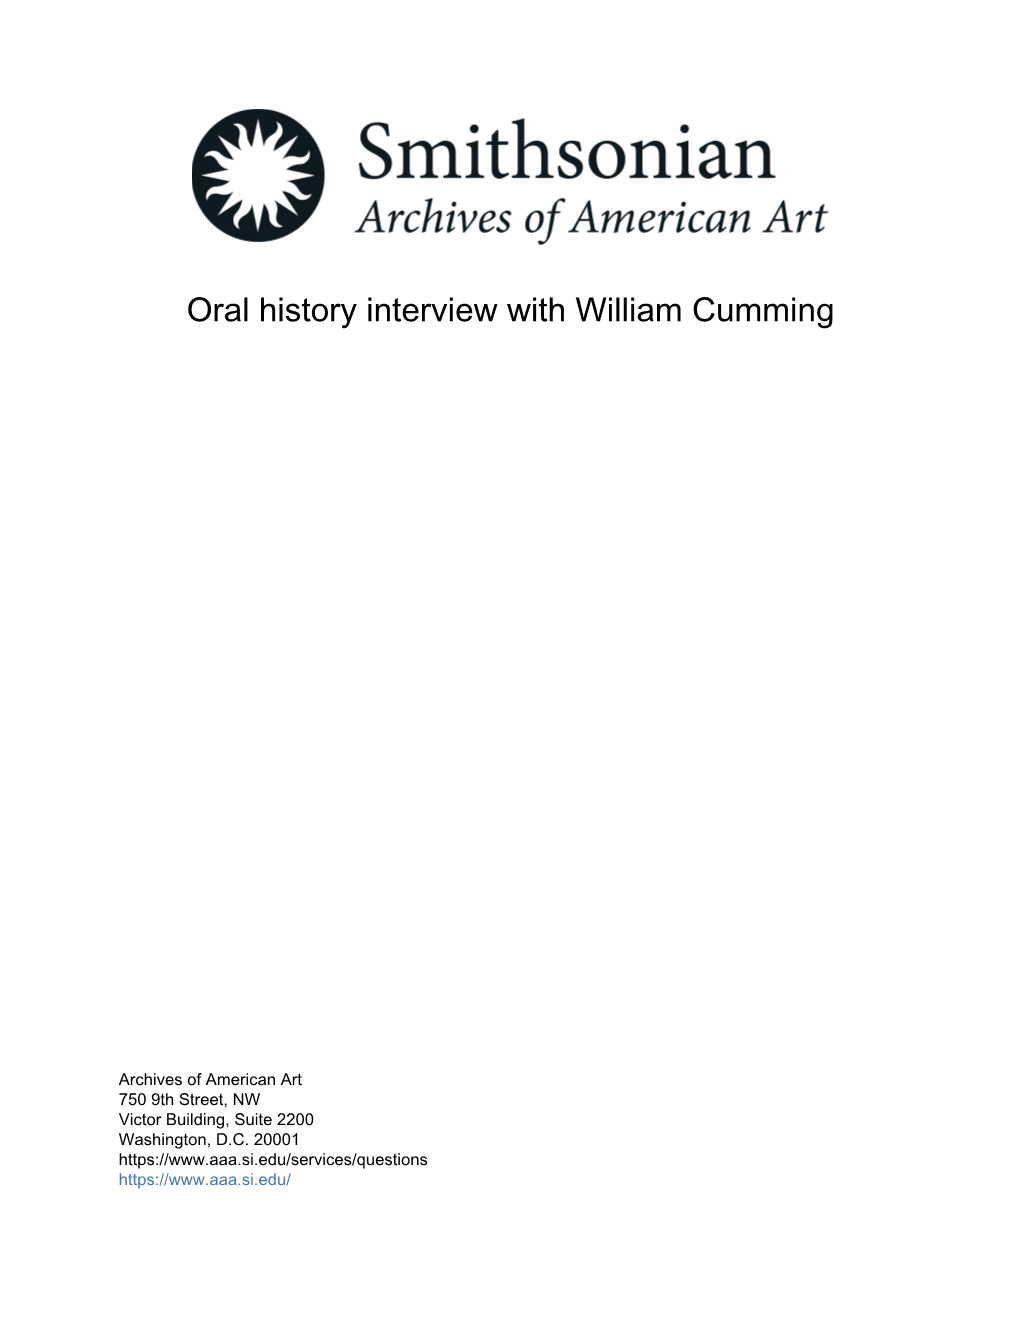 Oral History Interview with William Cumming